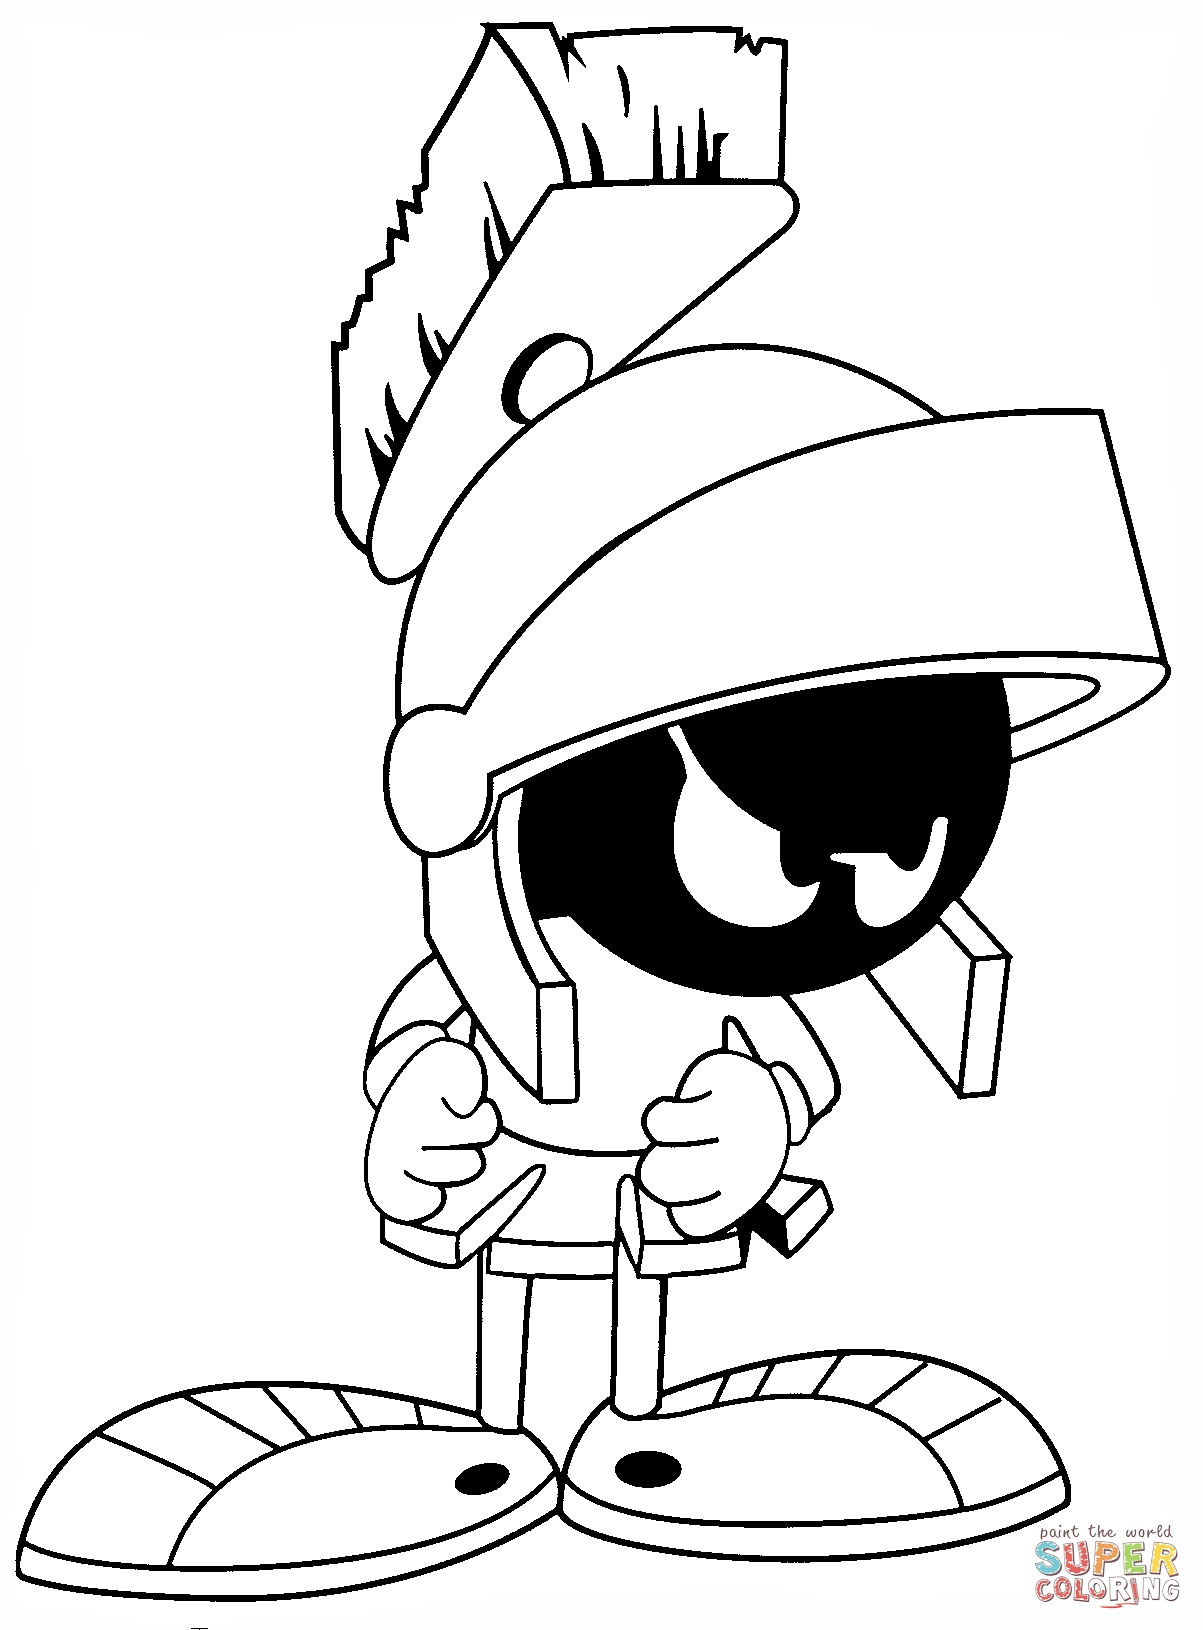 Baby Looney Tunes Taz Coloring Pages at GetColorings.com | Free